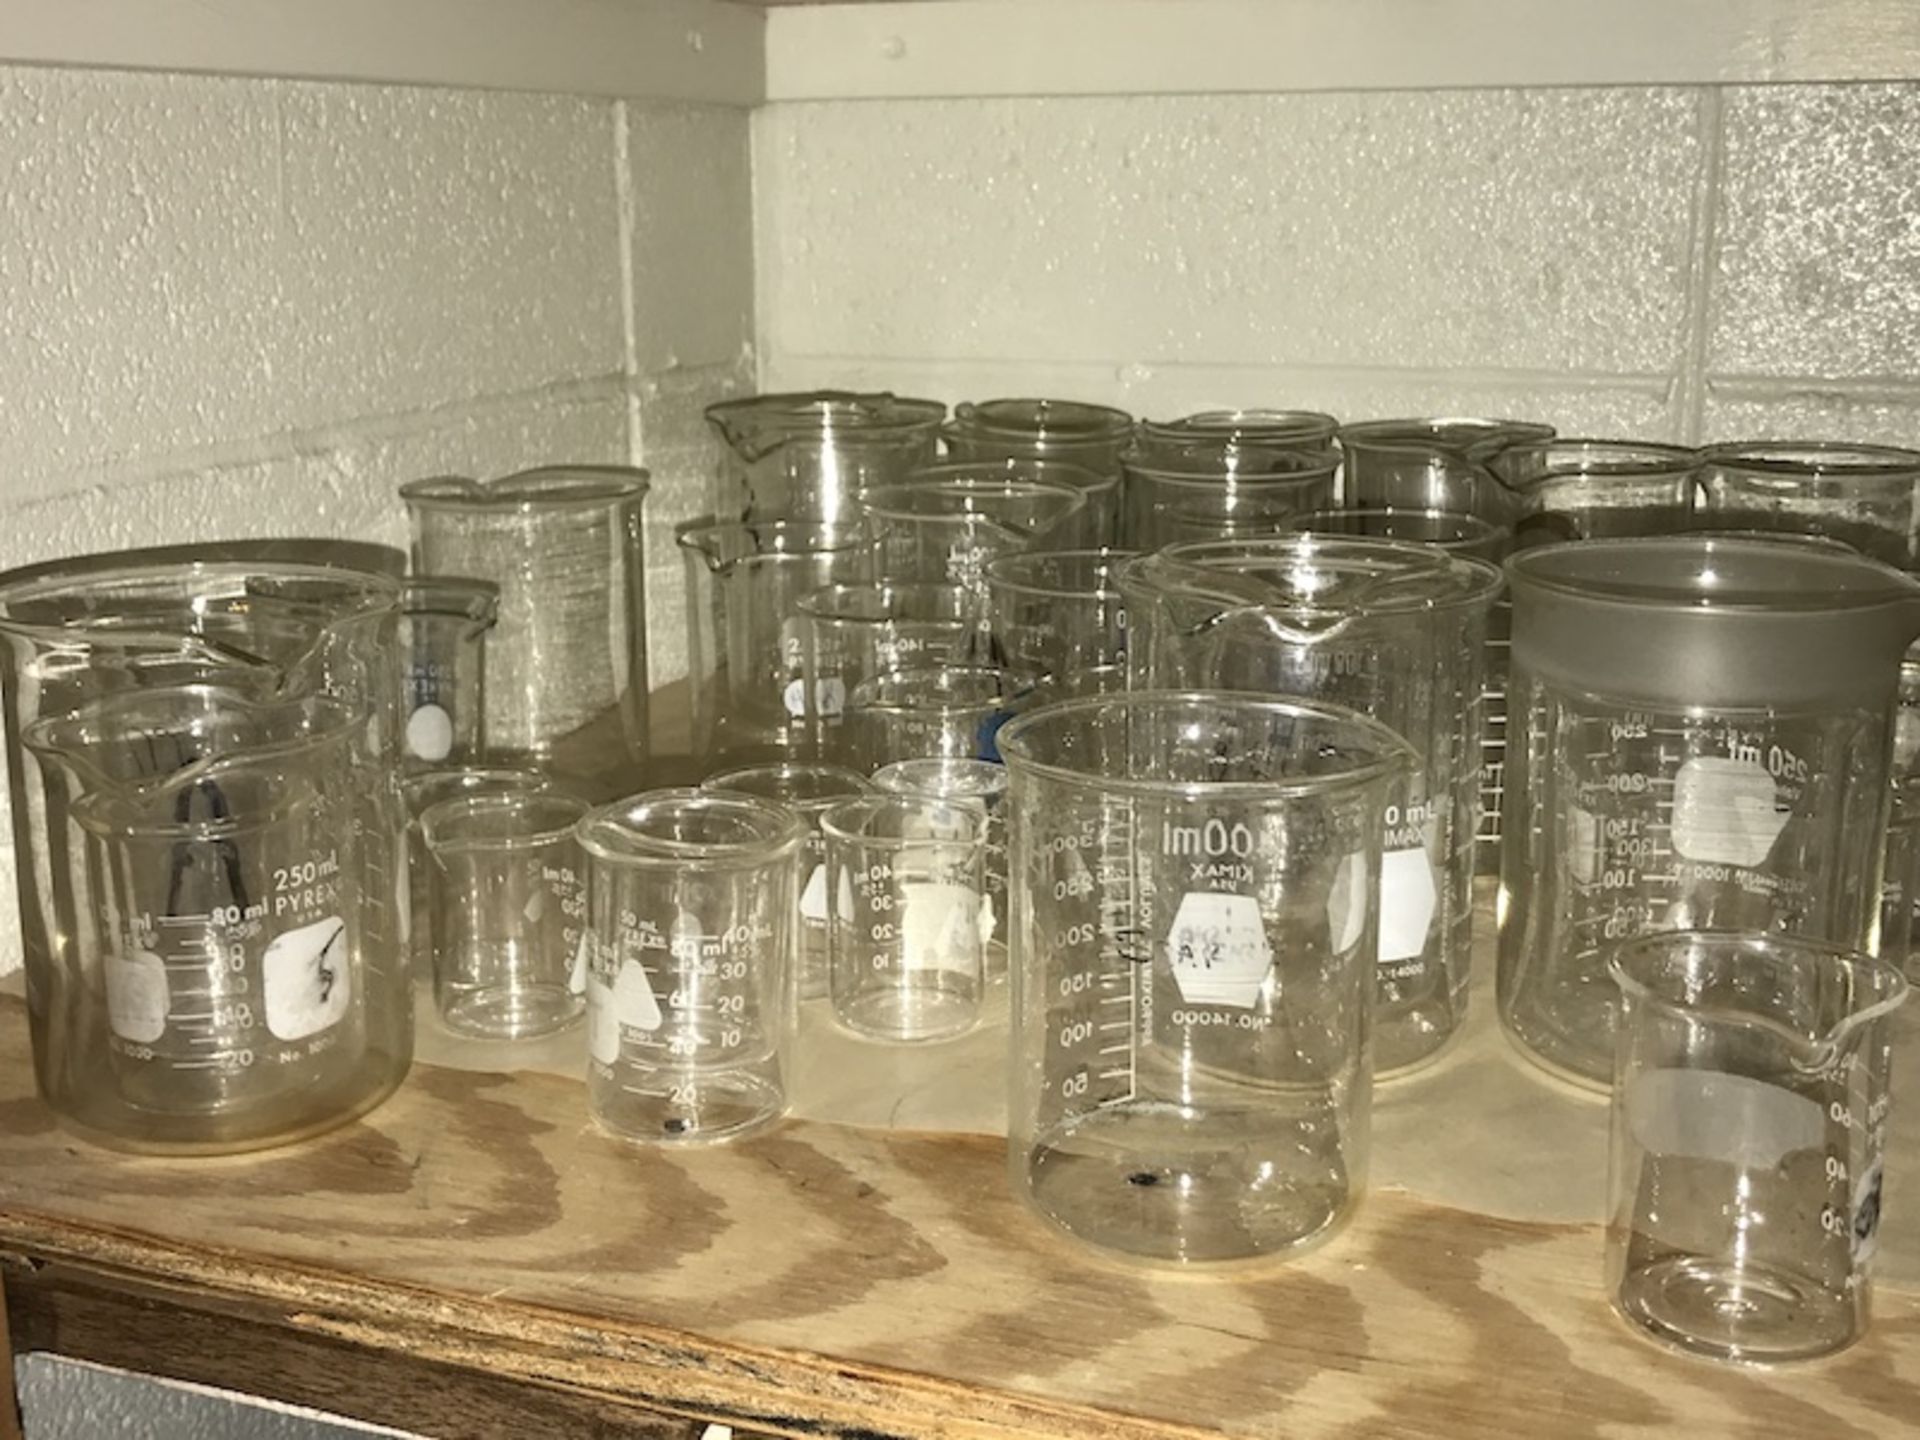 Lot of Misc. Glassware (Room 309) - Image 4 of 9